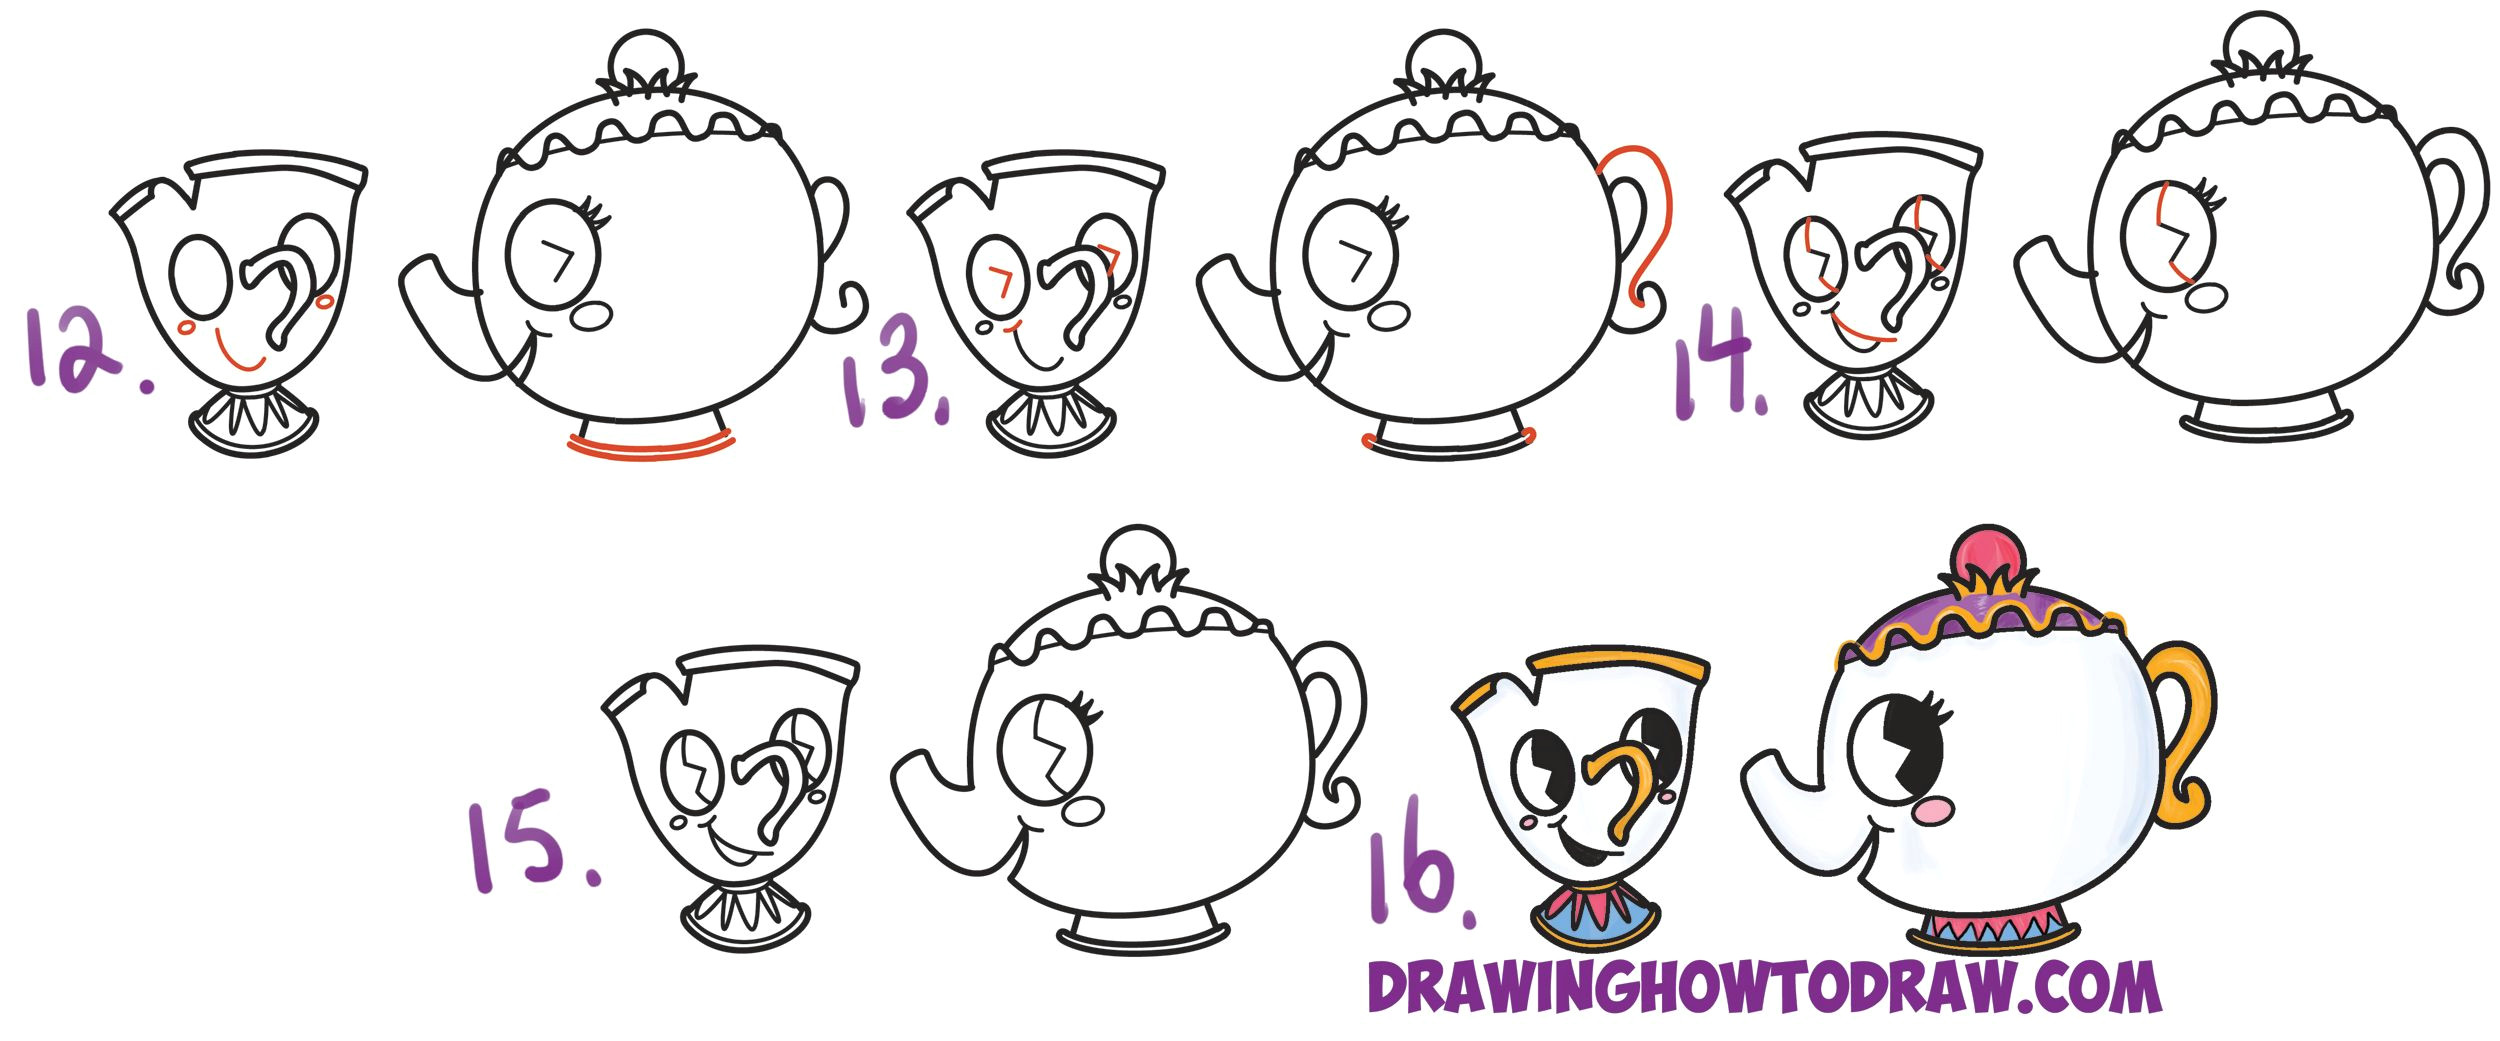 Cute Jasmine Drawing How to Draw Cute Kawaii Chibi Mrs Potts and Chip From Beauty and